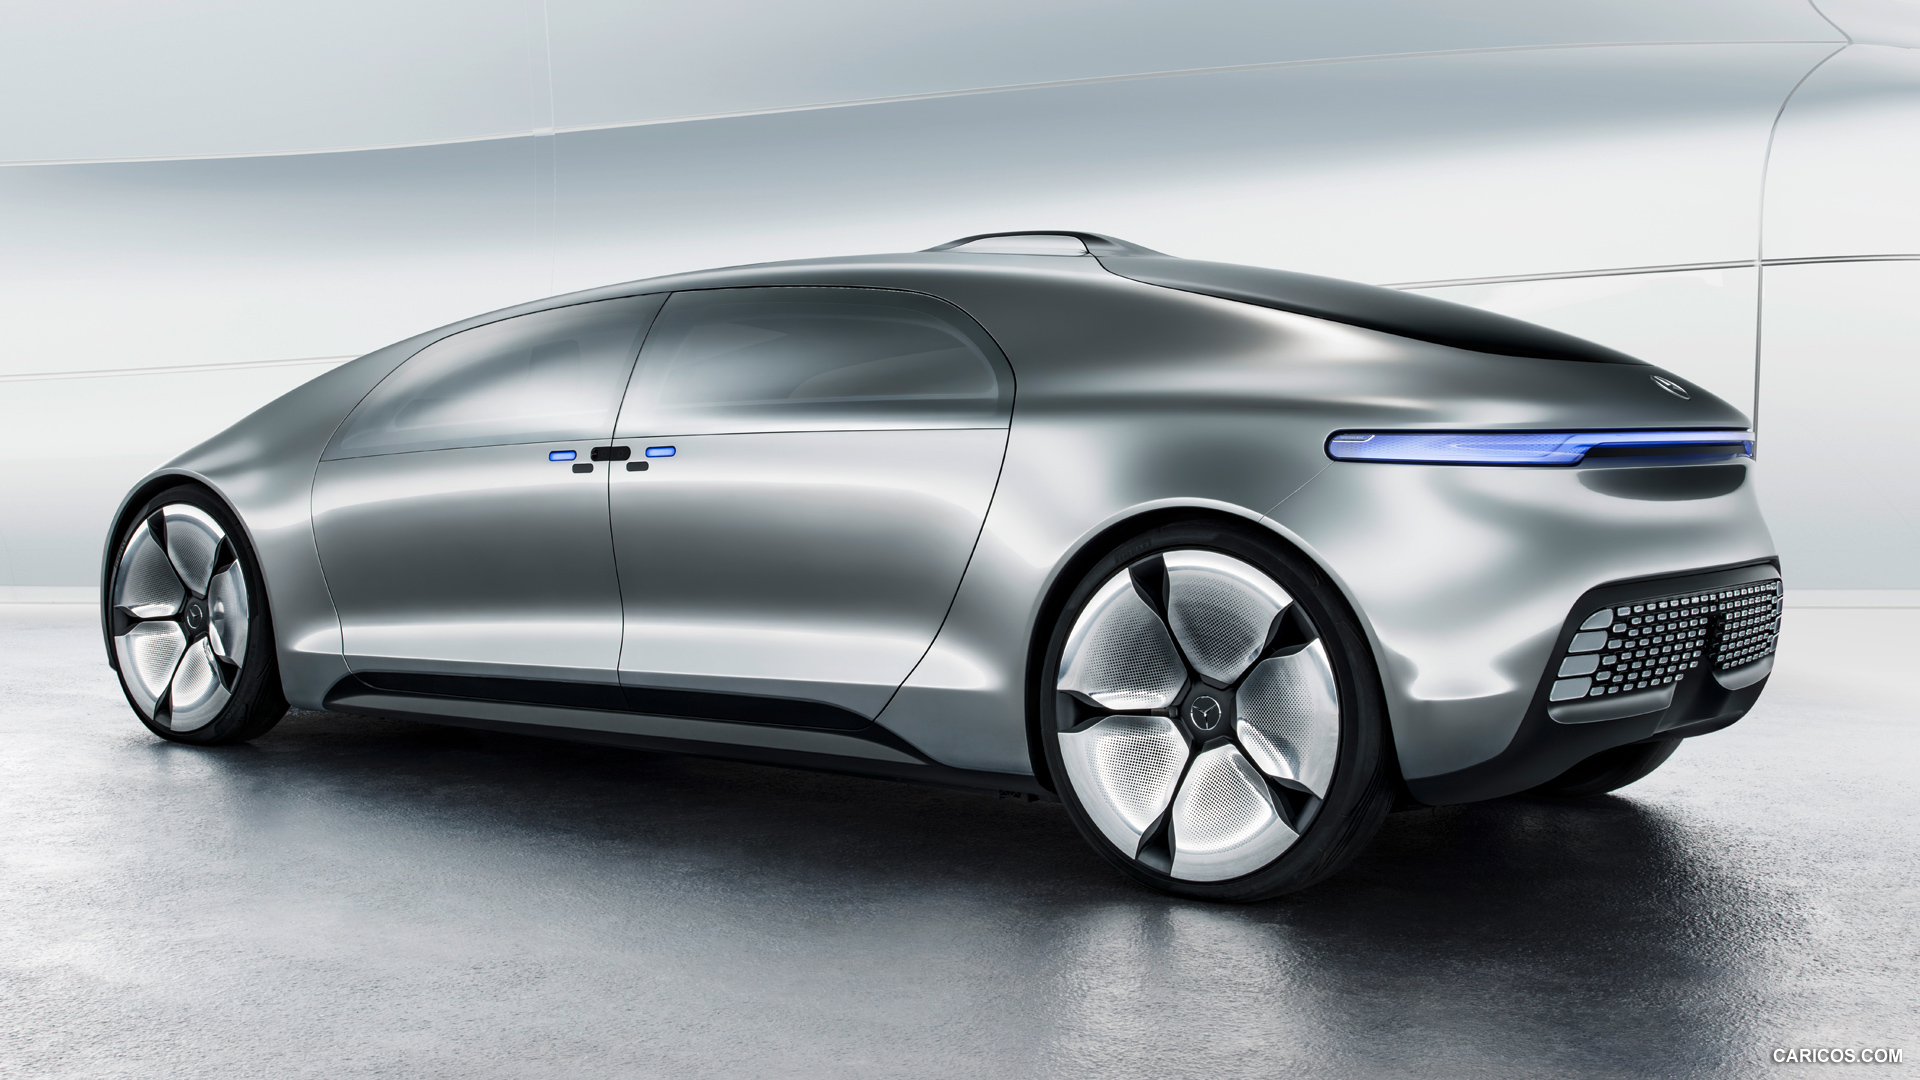 2015 Mercedes-Benz F 015 Luxury in Motion Concept  - Side, #65 of 92